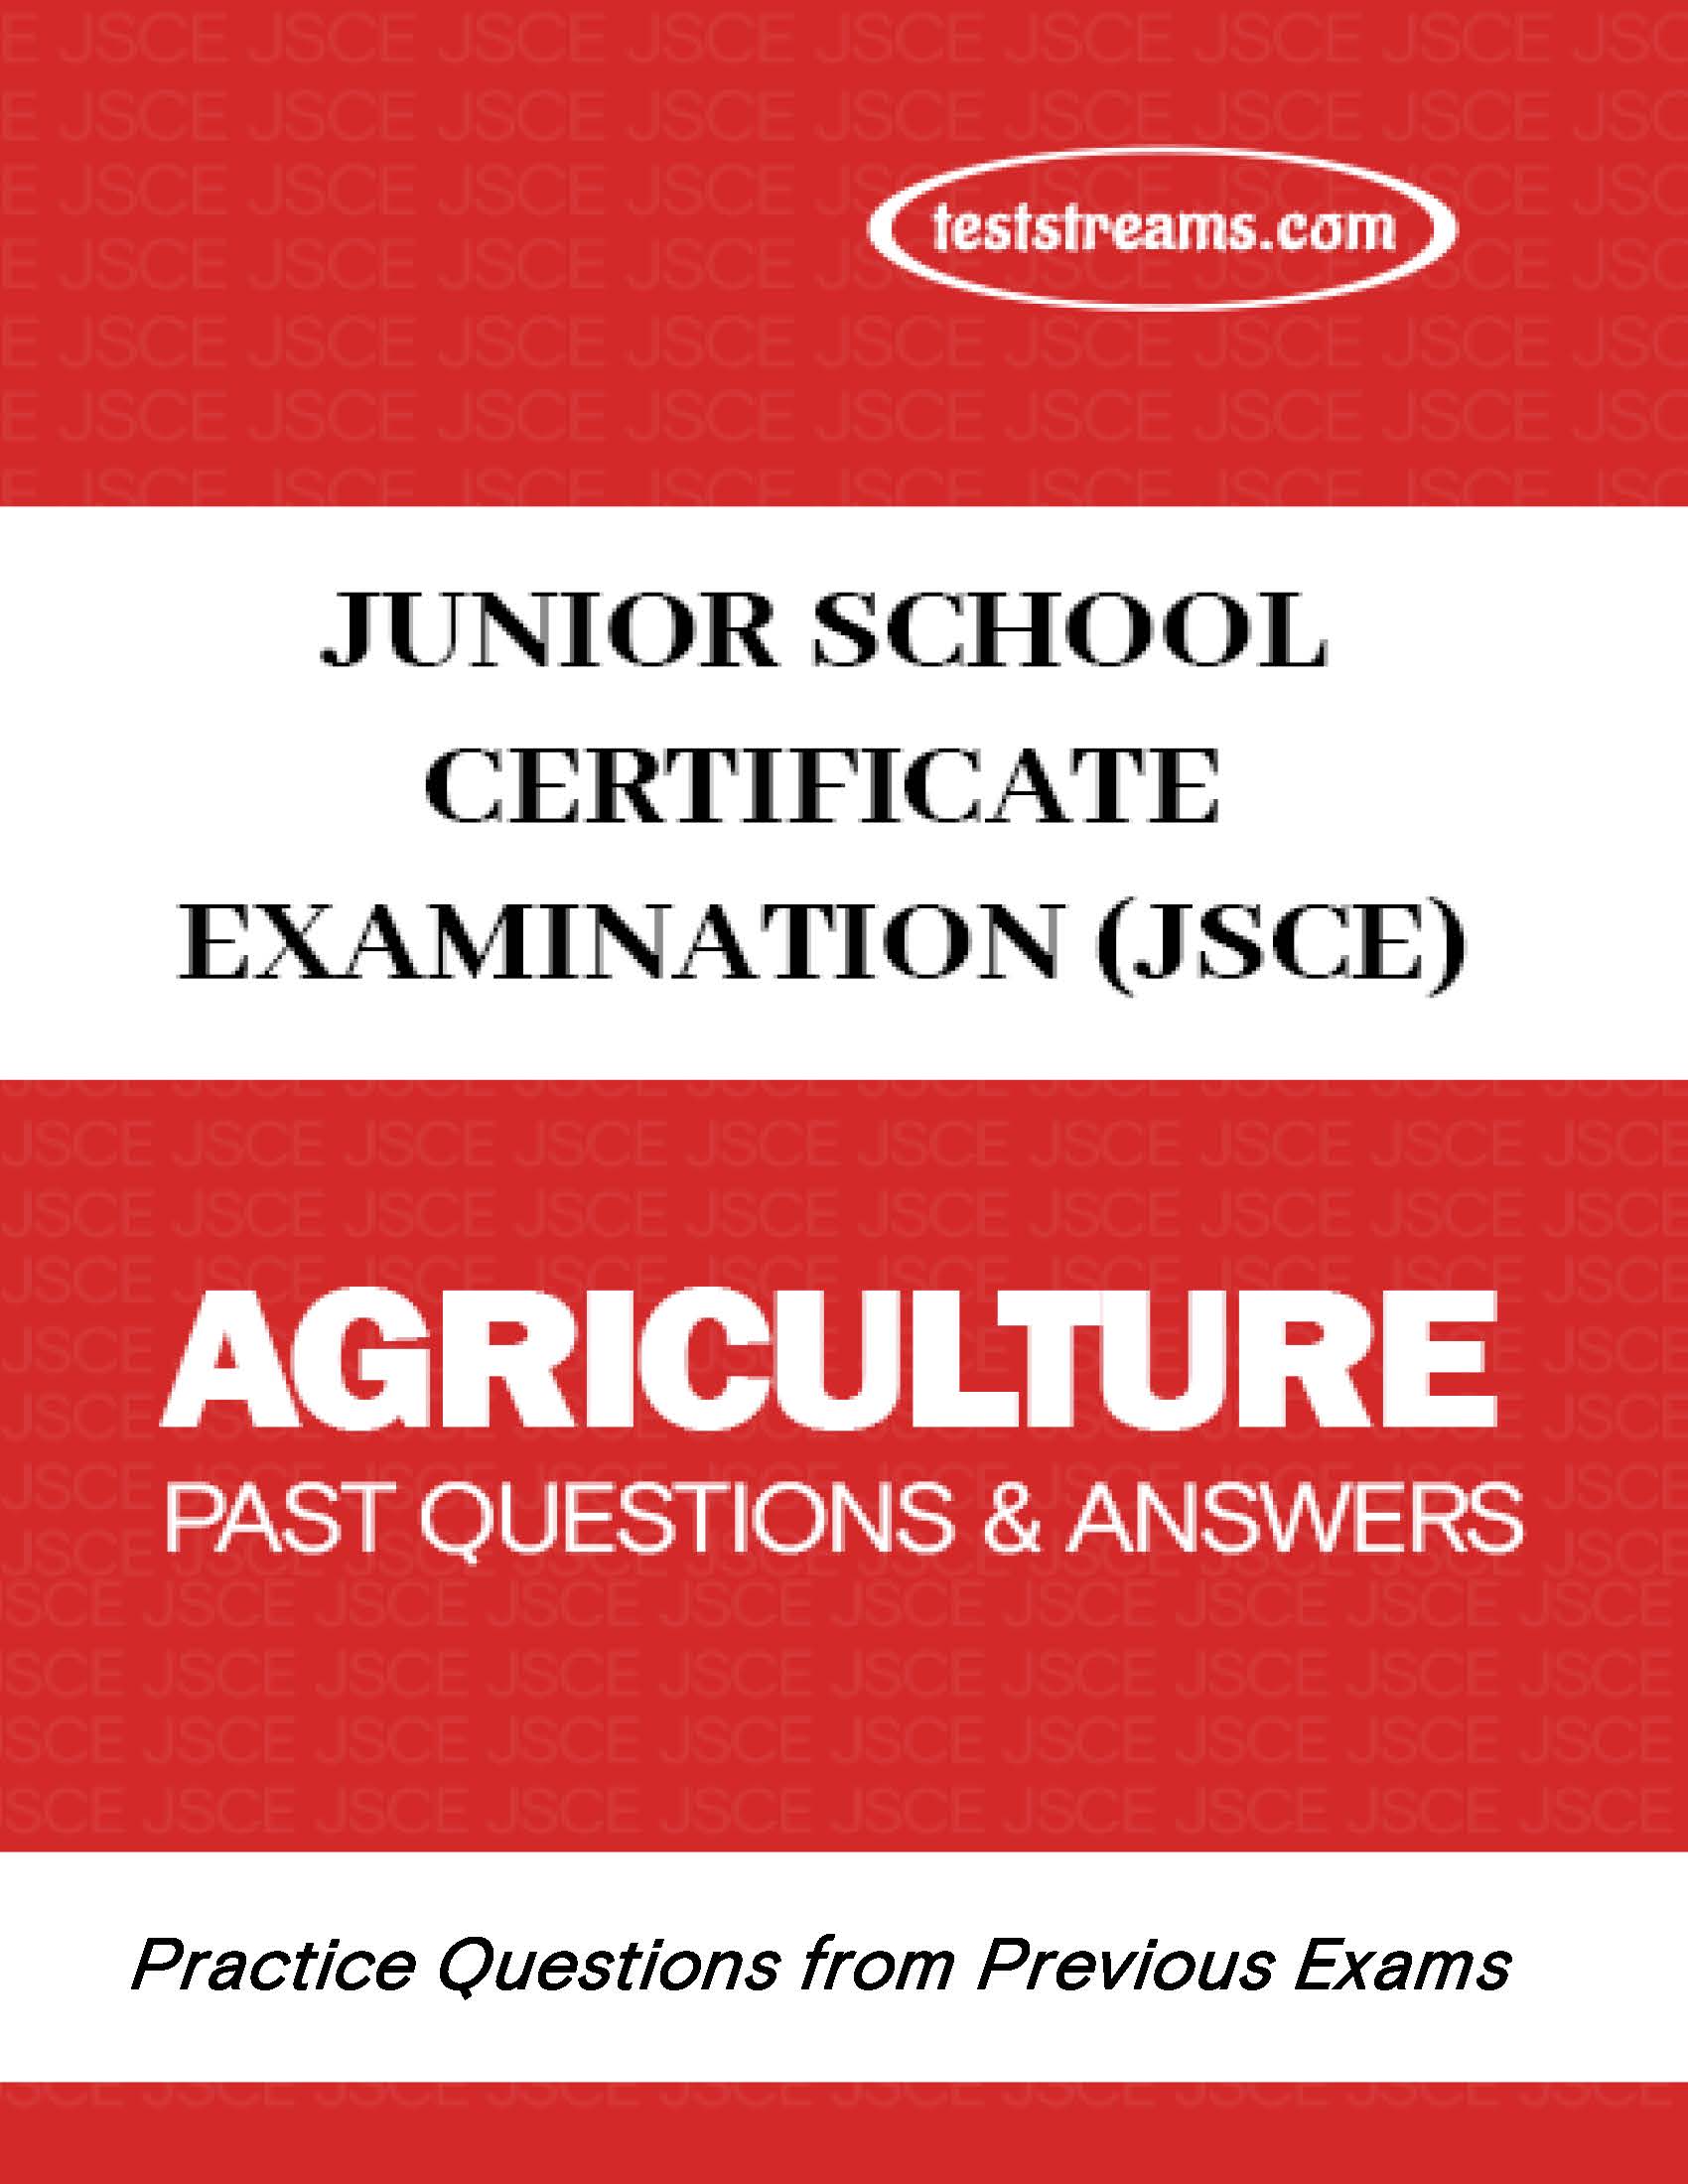 JSCE (BSCE) Agricultural Science Practice Questions and Answers MS-WORD/PDF Download